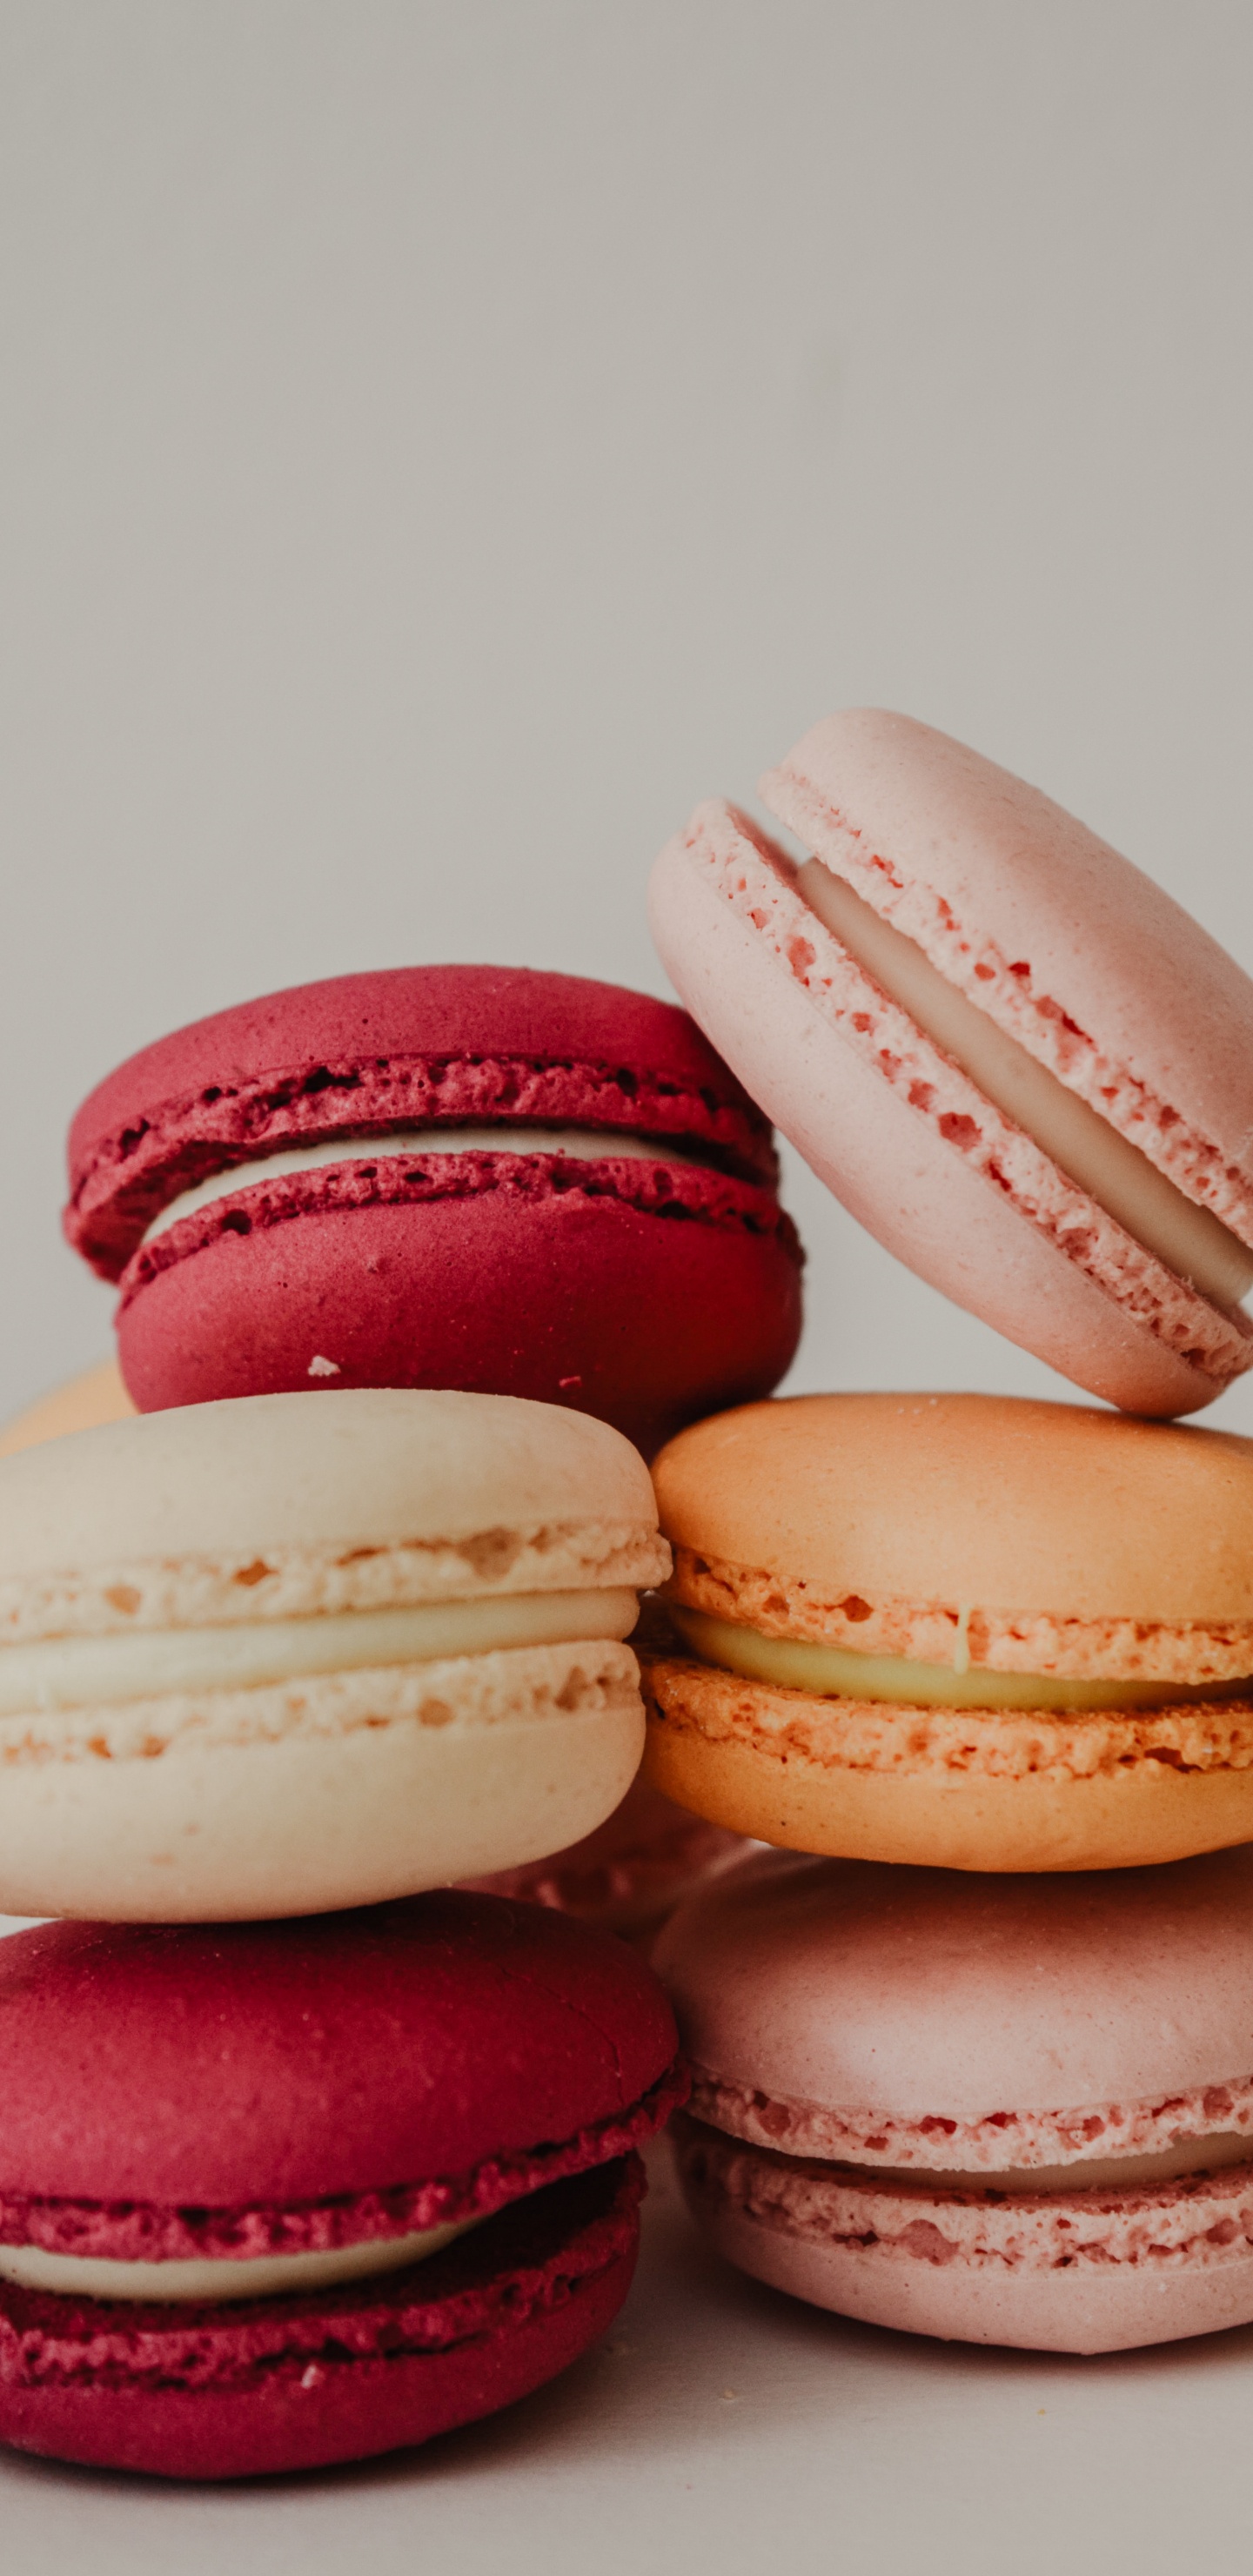 3 Macarons Roses et Blancs. Wallpaper in 1440x2960 Resolution